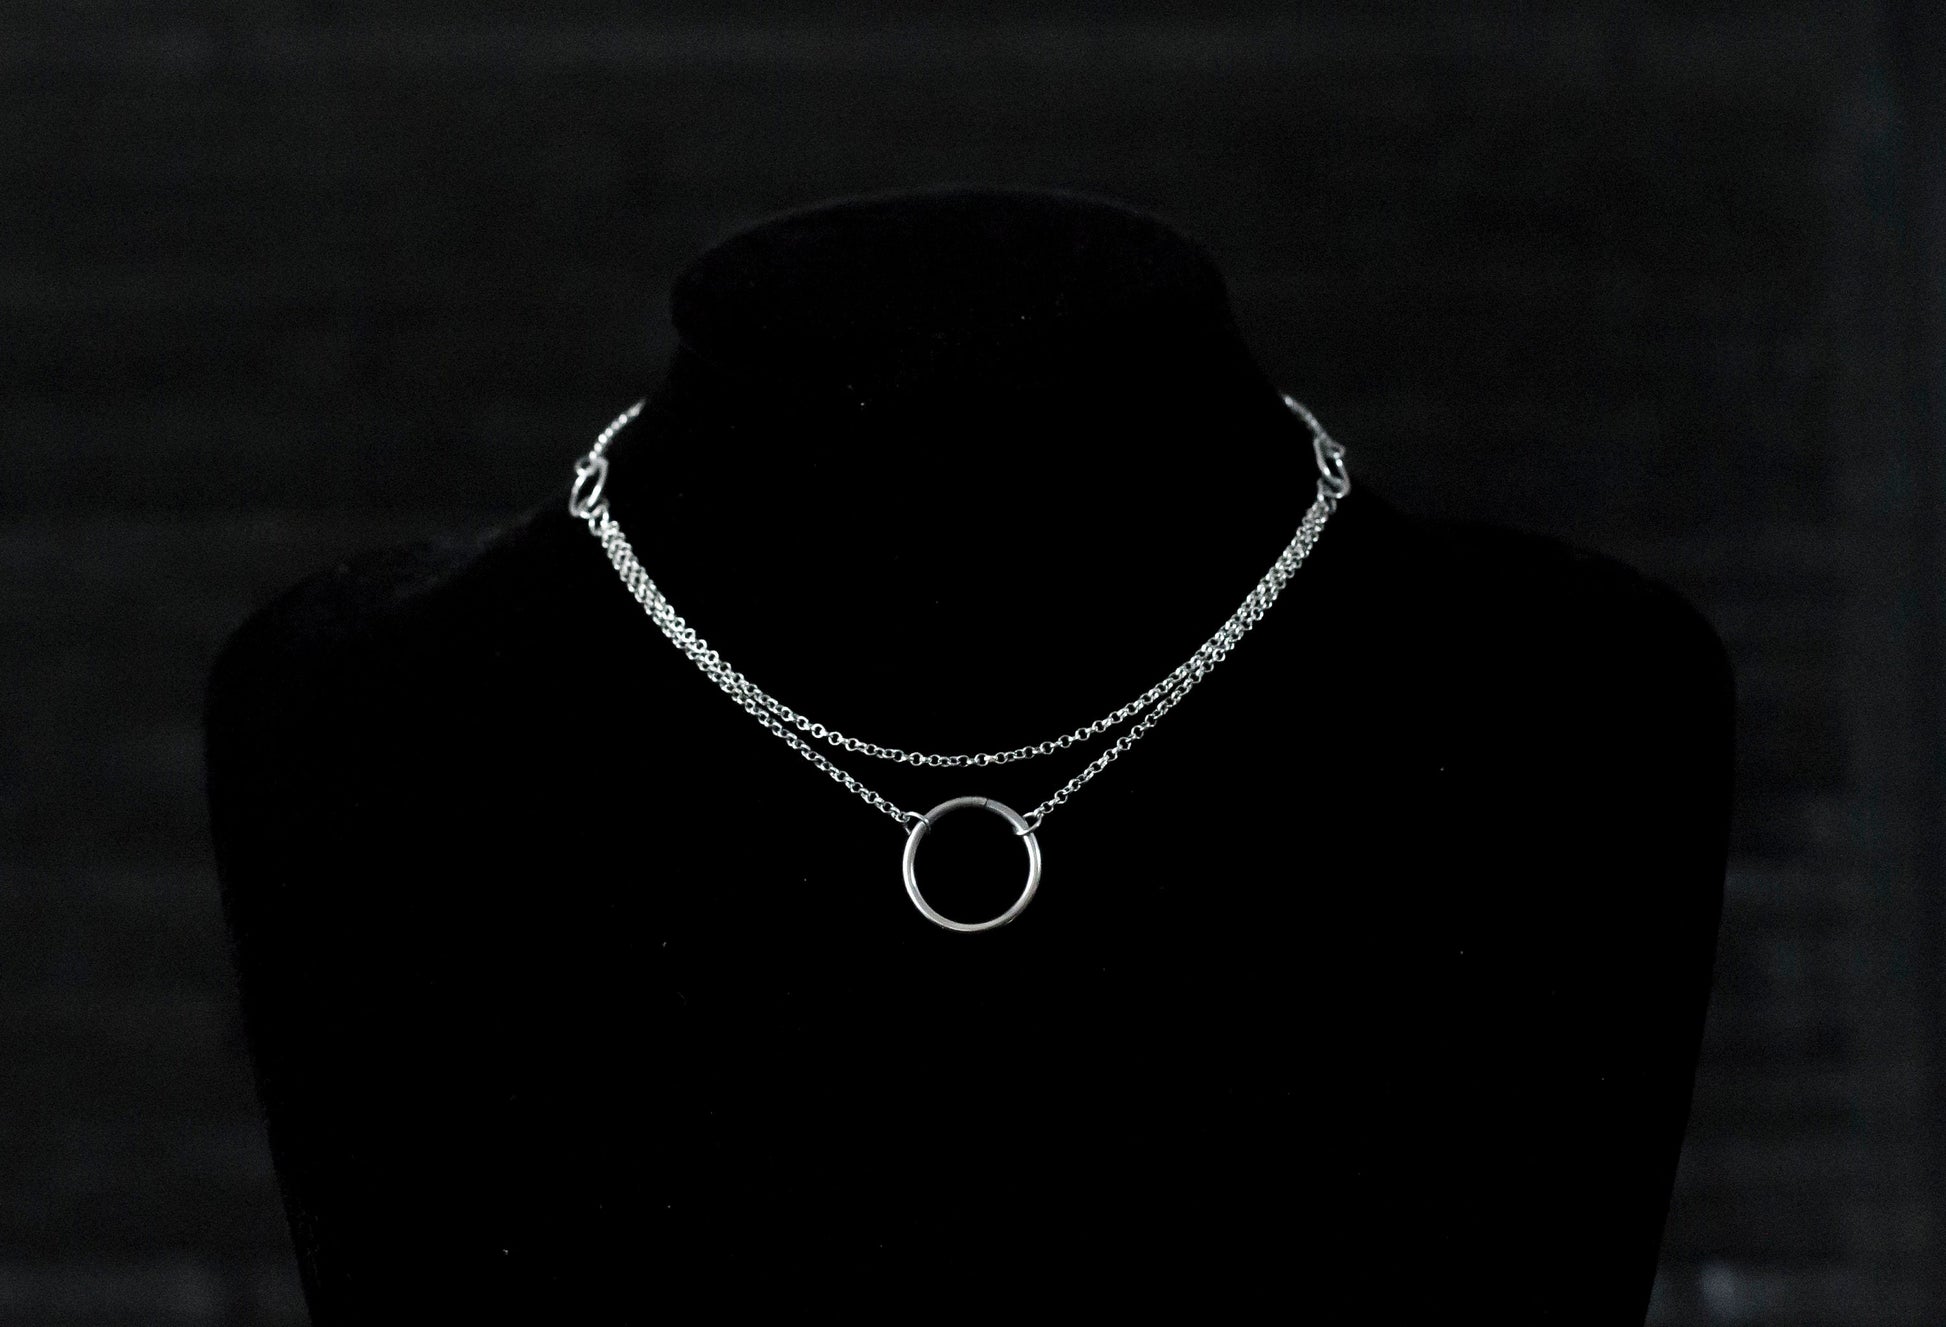 Elegant Myril Jewels chain necklace featuring a minimalist o-ring, ideal for the discerning goth. Perfect for Halloween or everyday wear, this piece blends dark-avantgarde style with subtle punk undertones, making it a unique goth girlfriend gift or a bold addition to a festival ensemble.